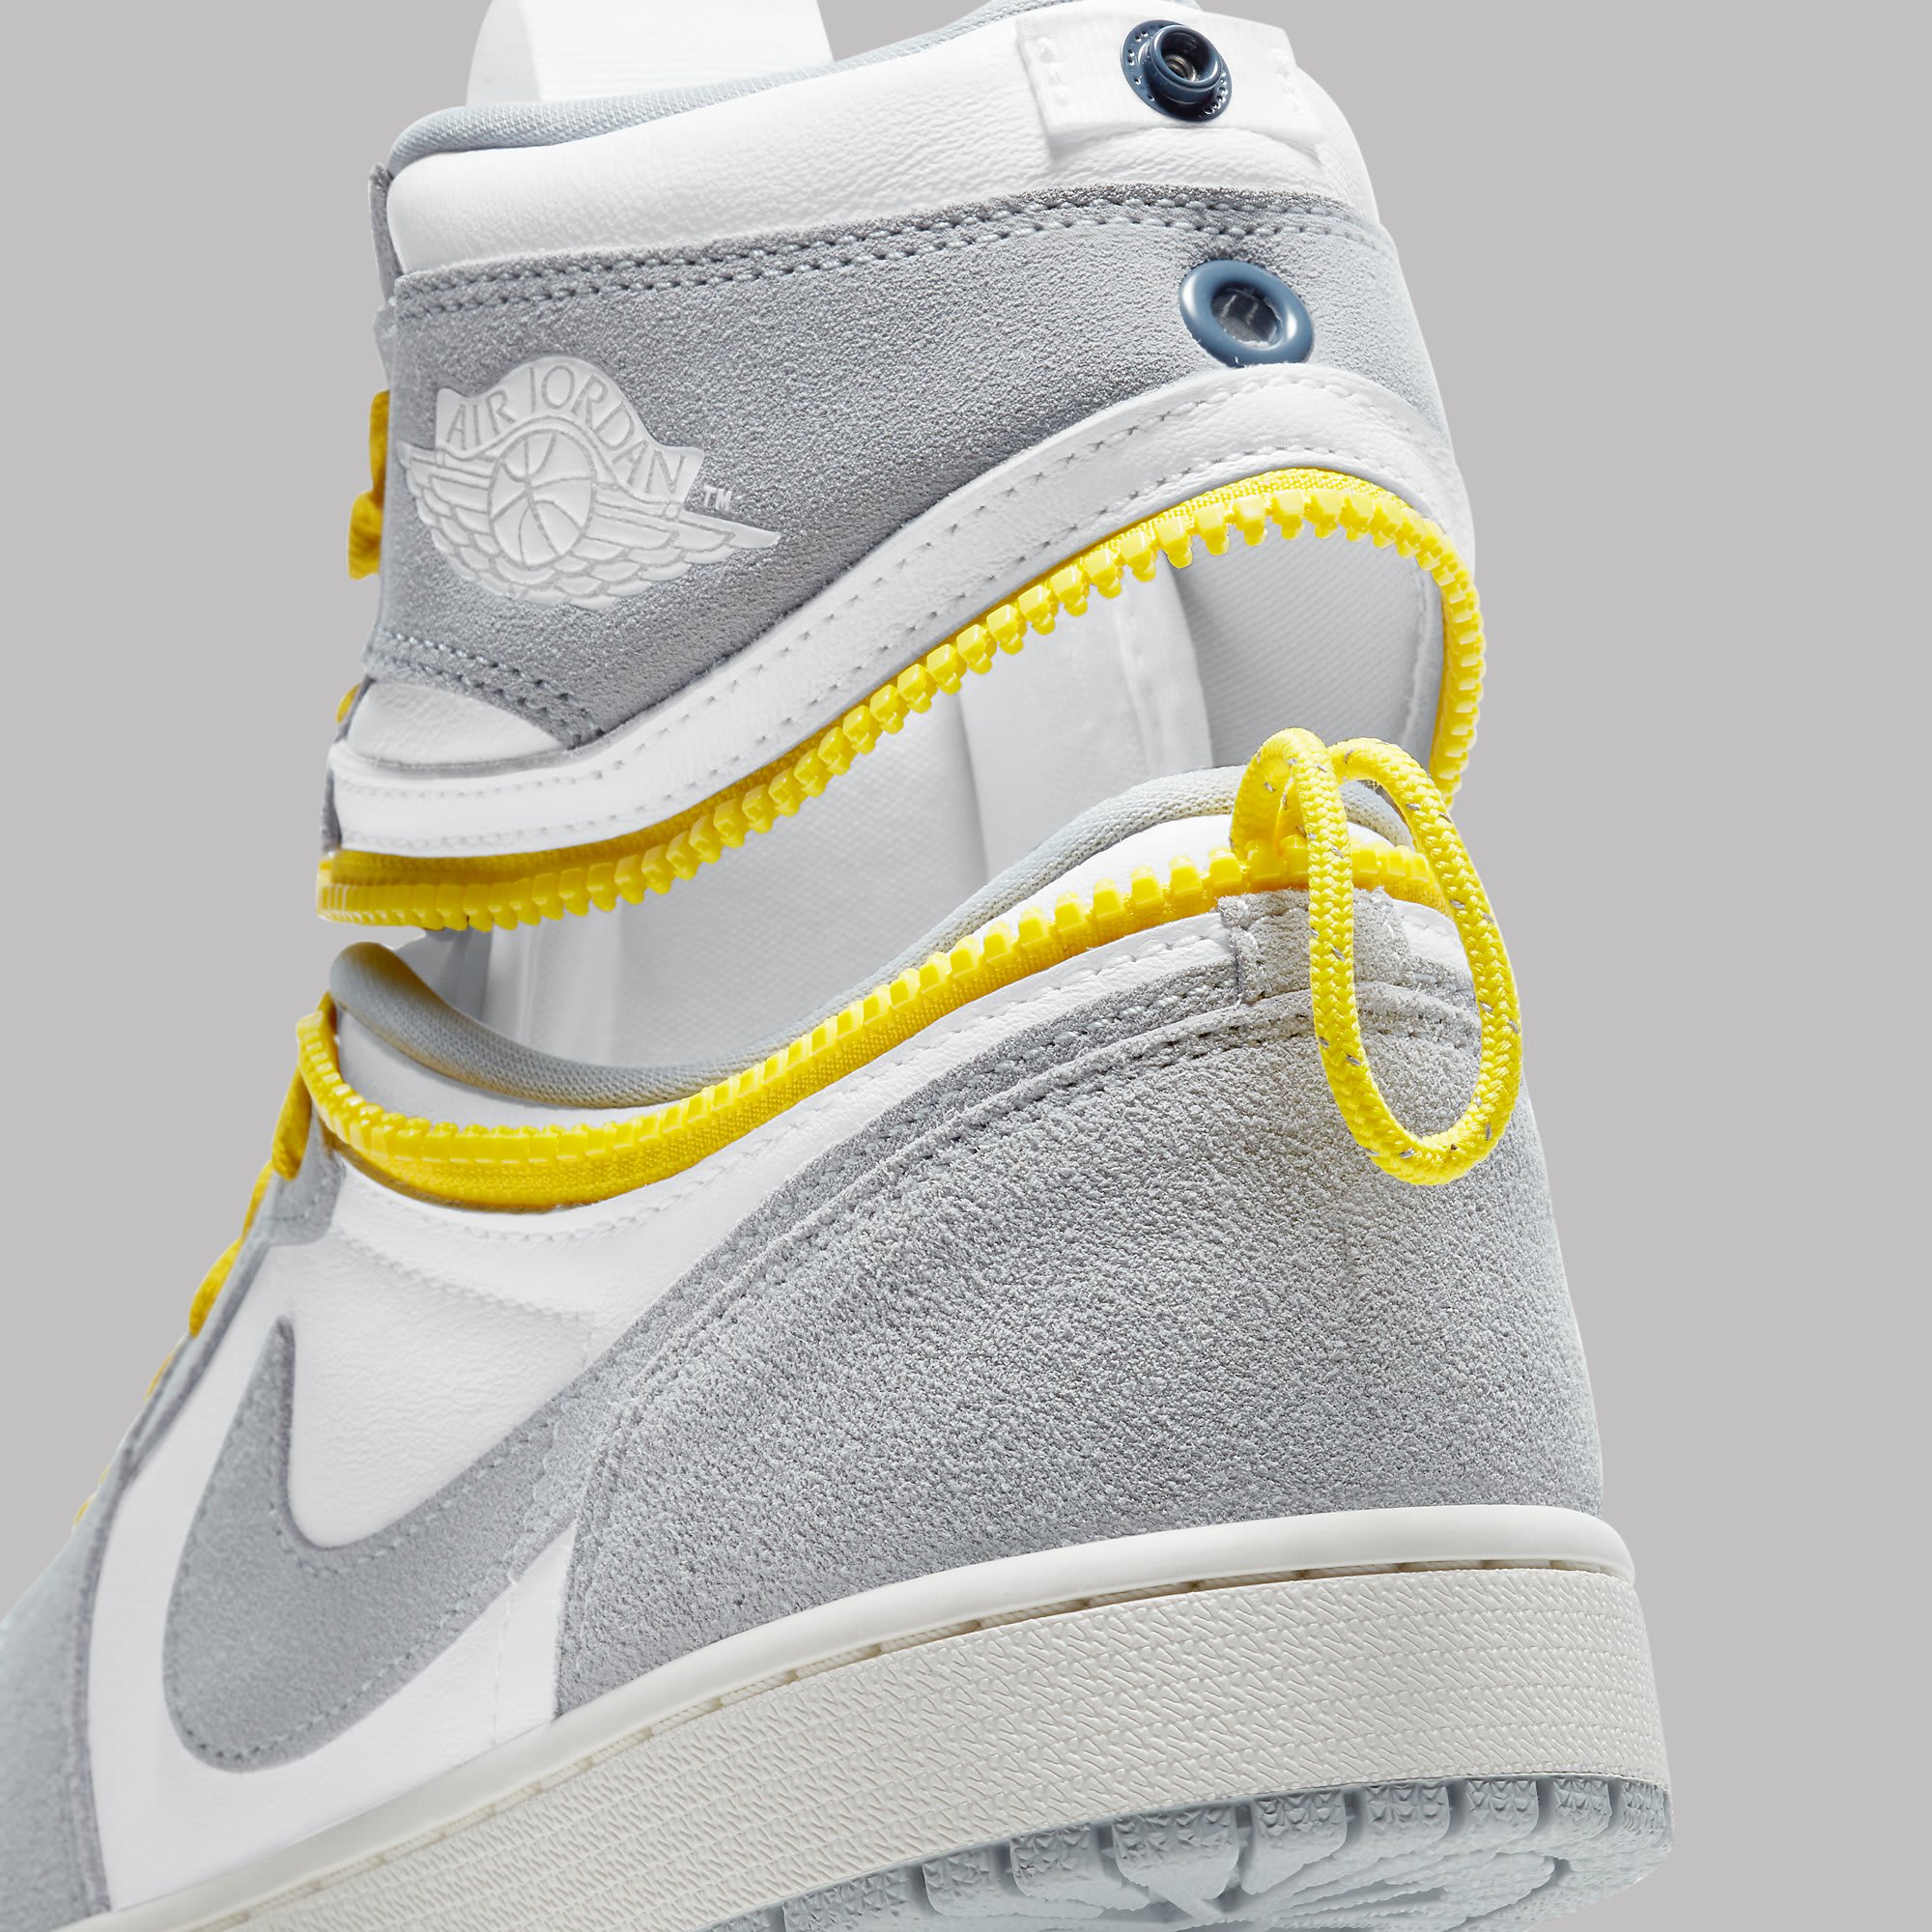 The Air Jordan 1 Switch Converts Into a Low-Top | Complex